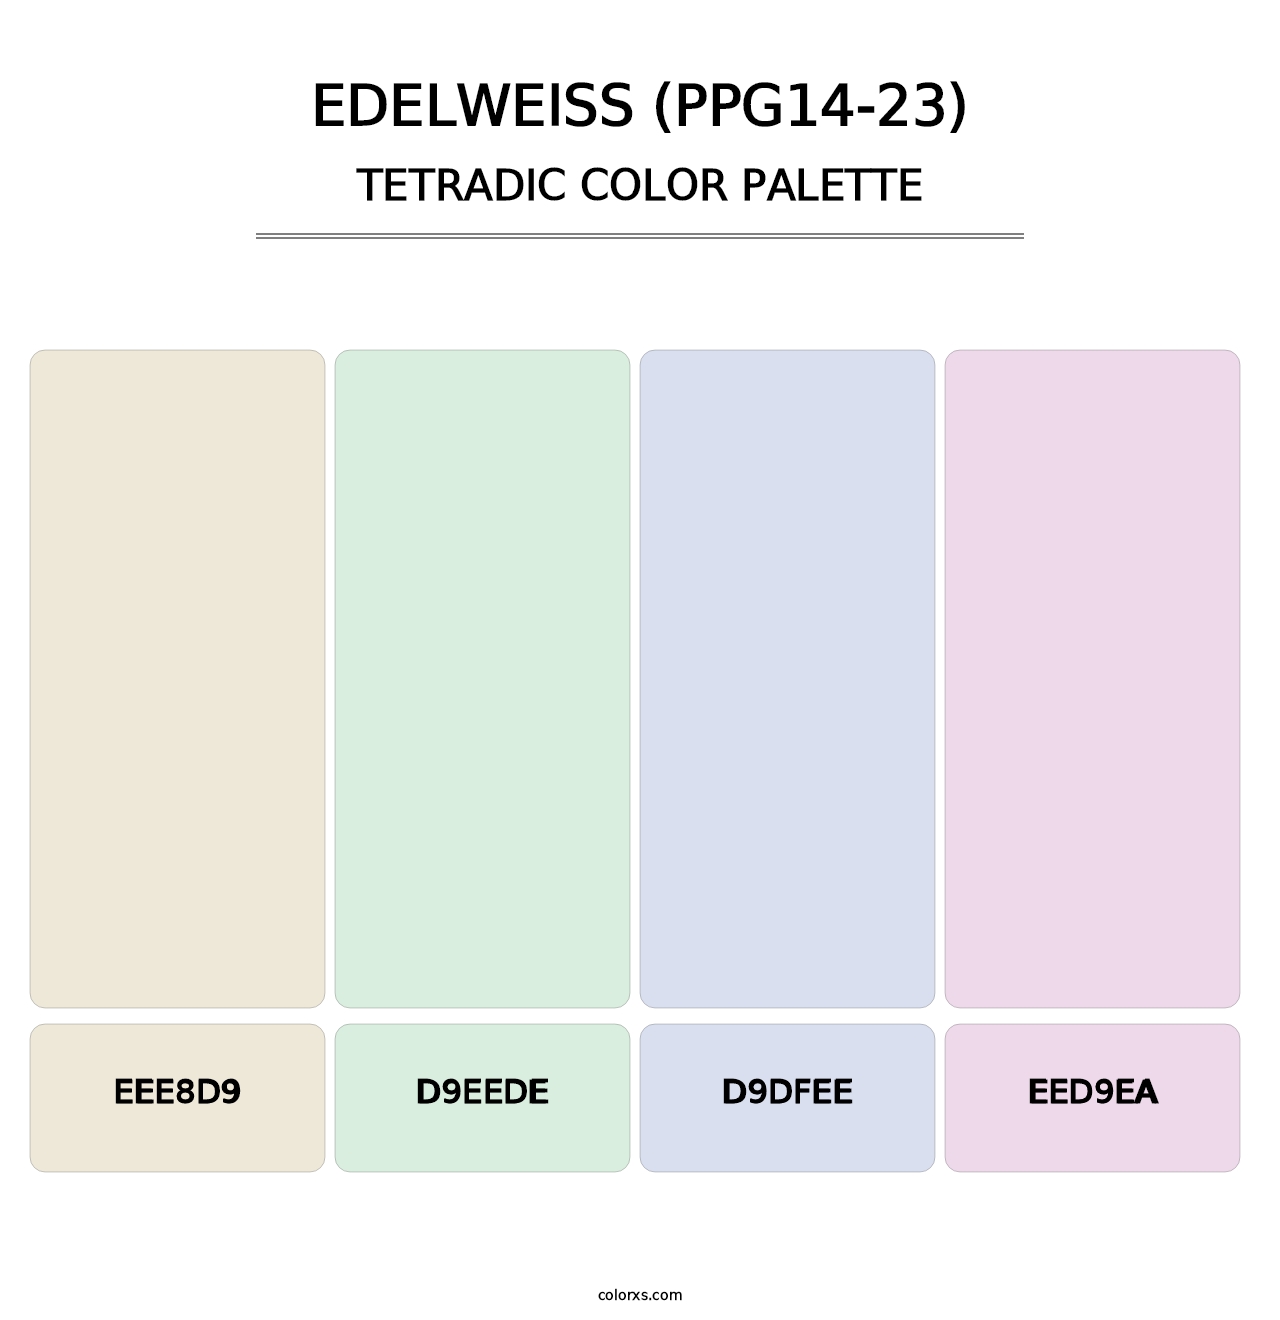 Edelweiss (PPG14-23) - Tetradic Color Palette